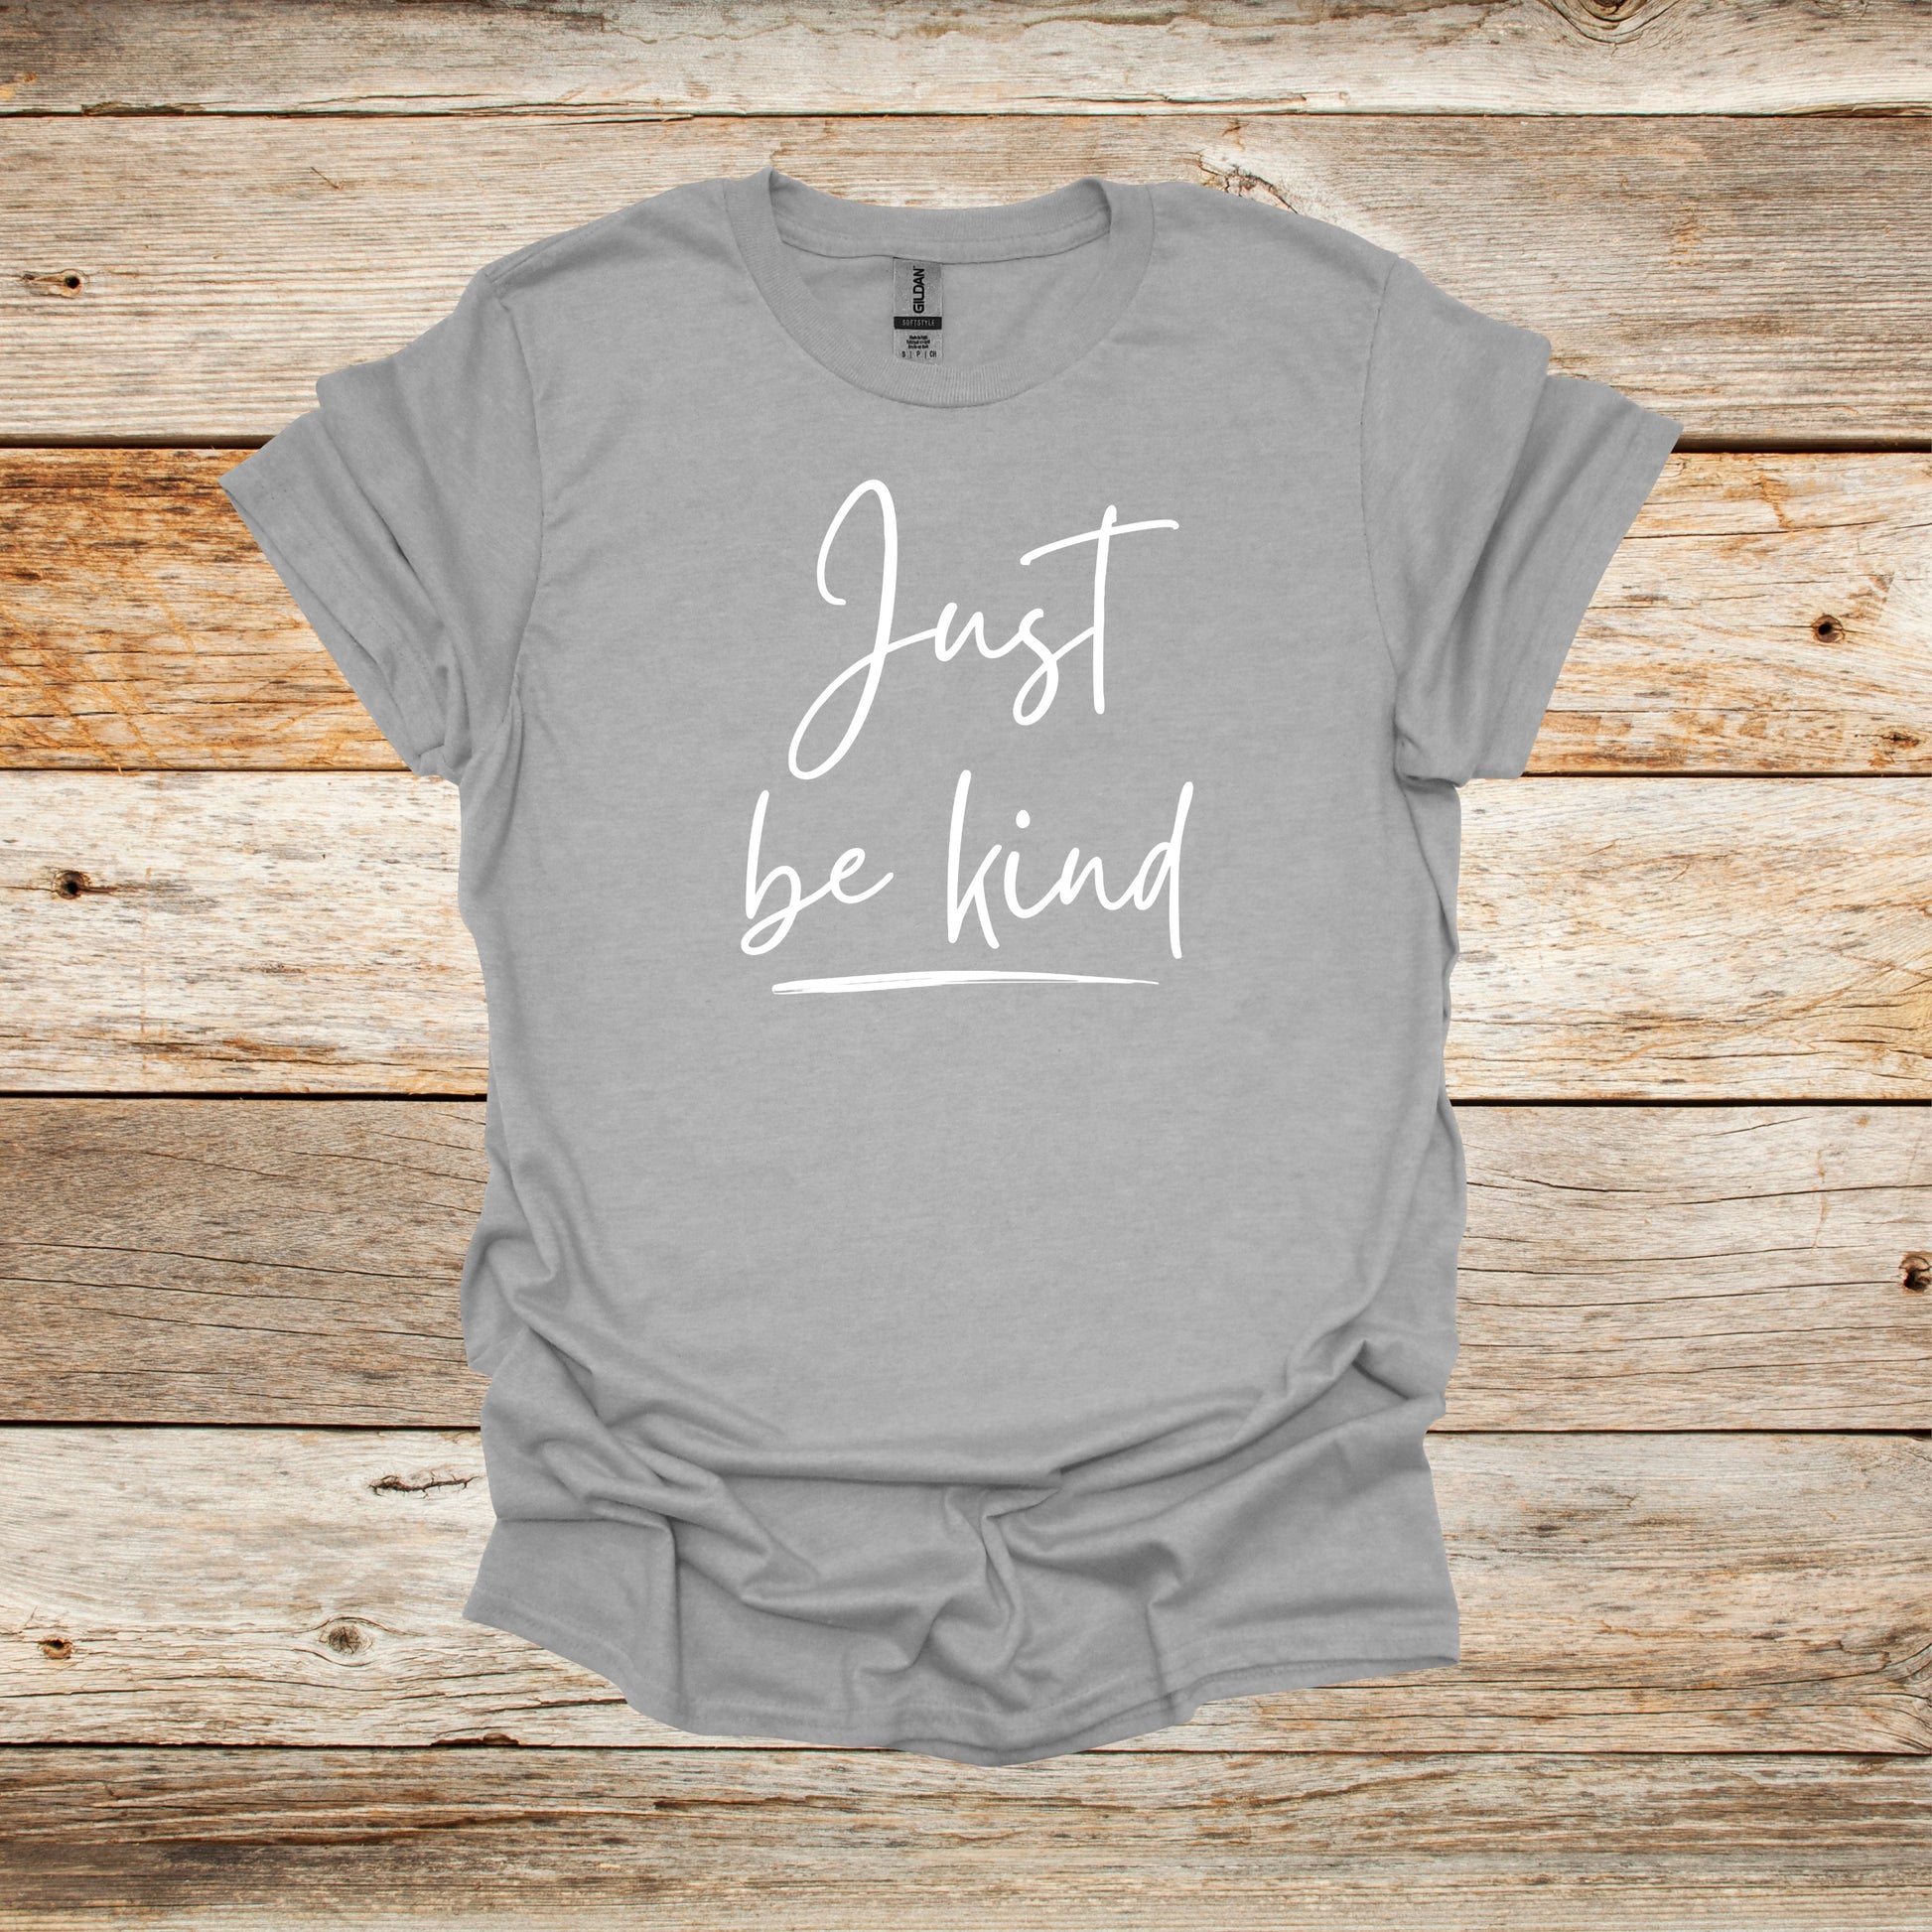 Sayings T-Shirt - Just Be Kind - Men's and Women's Tee Shirts - Sayings T-Shirts Graphic Avenue Sport Grey Adult Small 